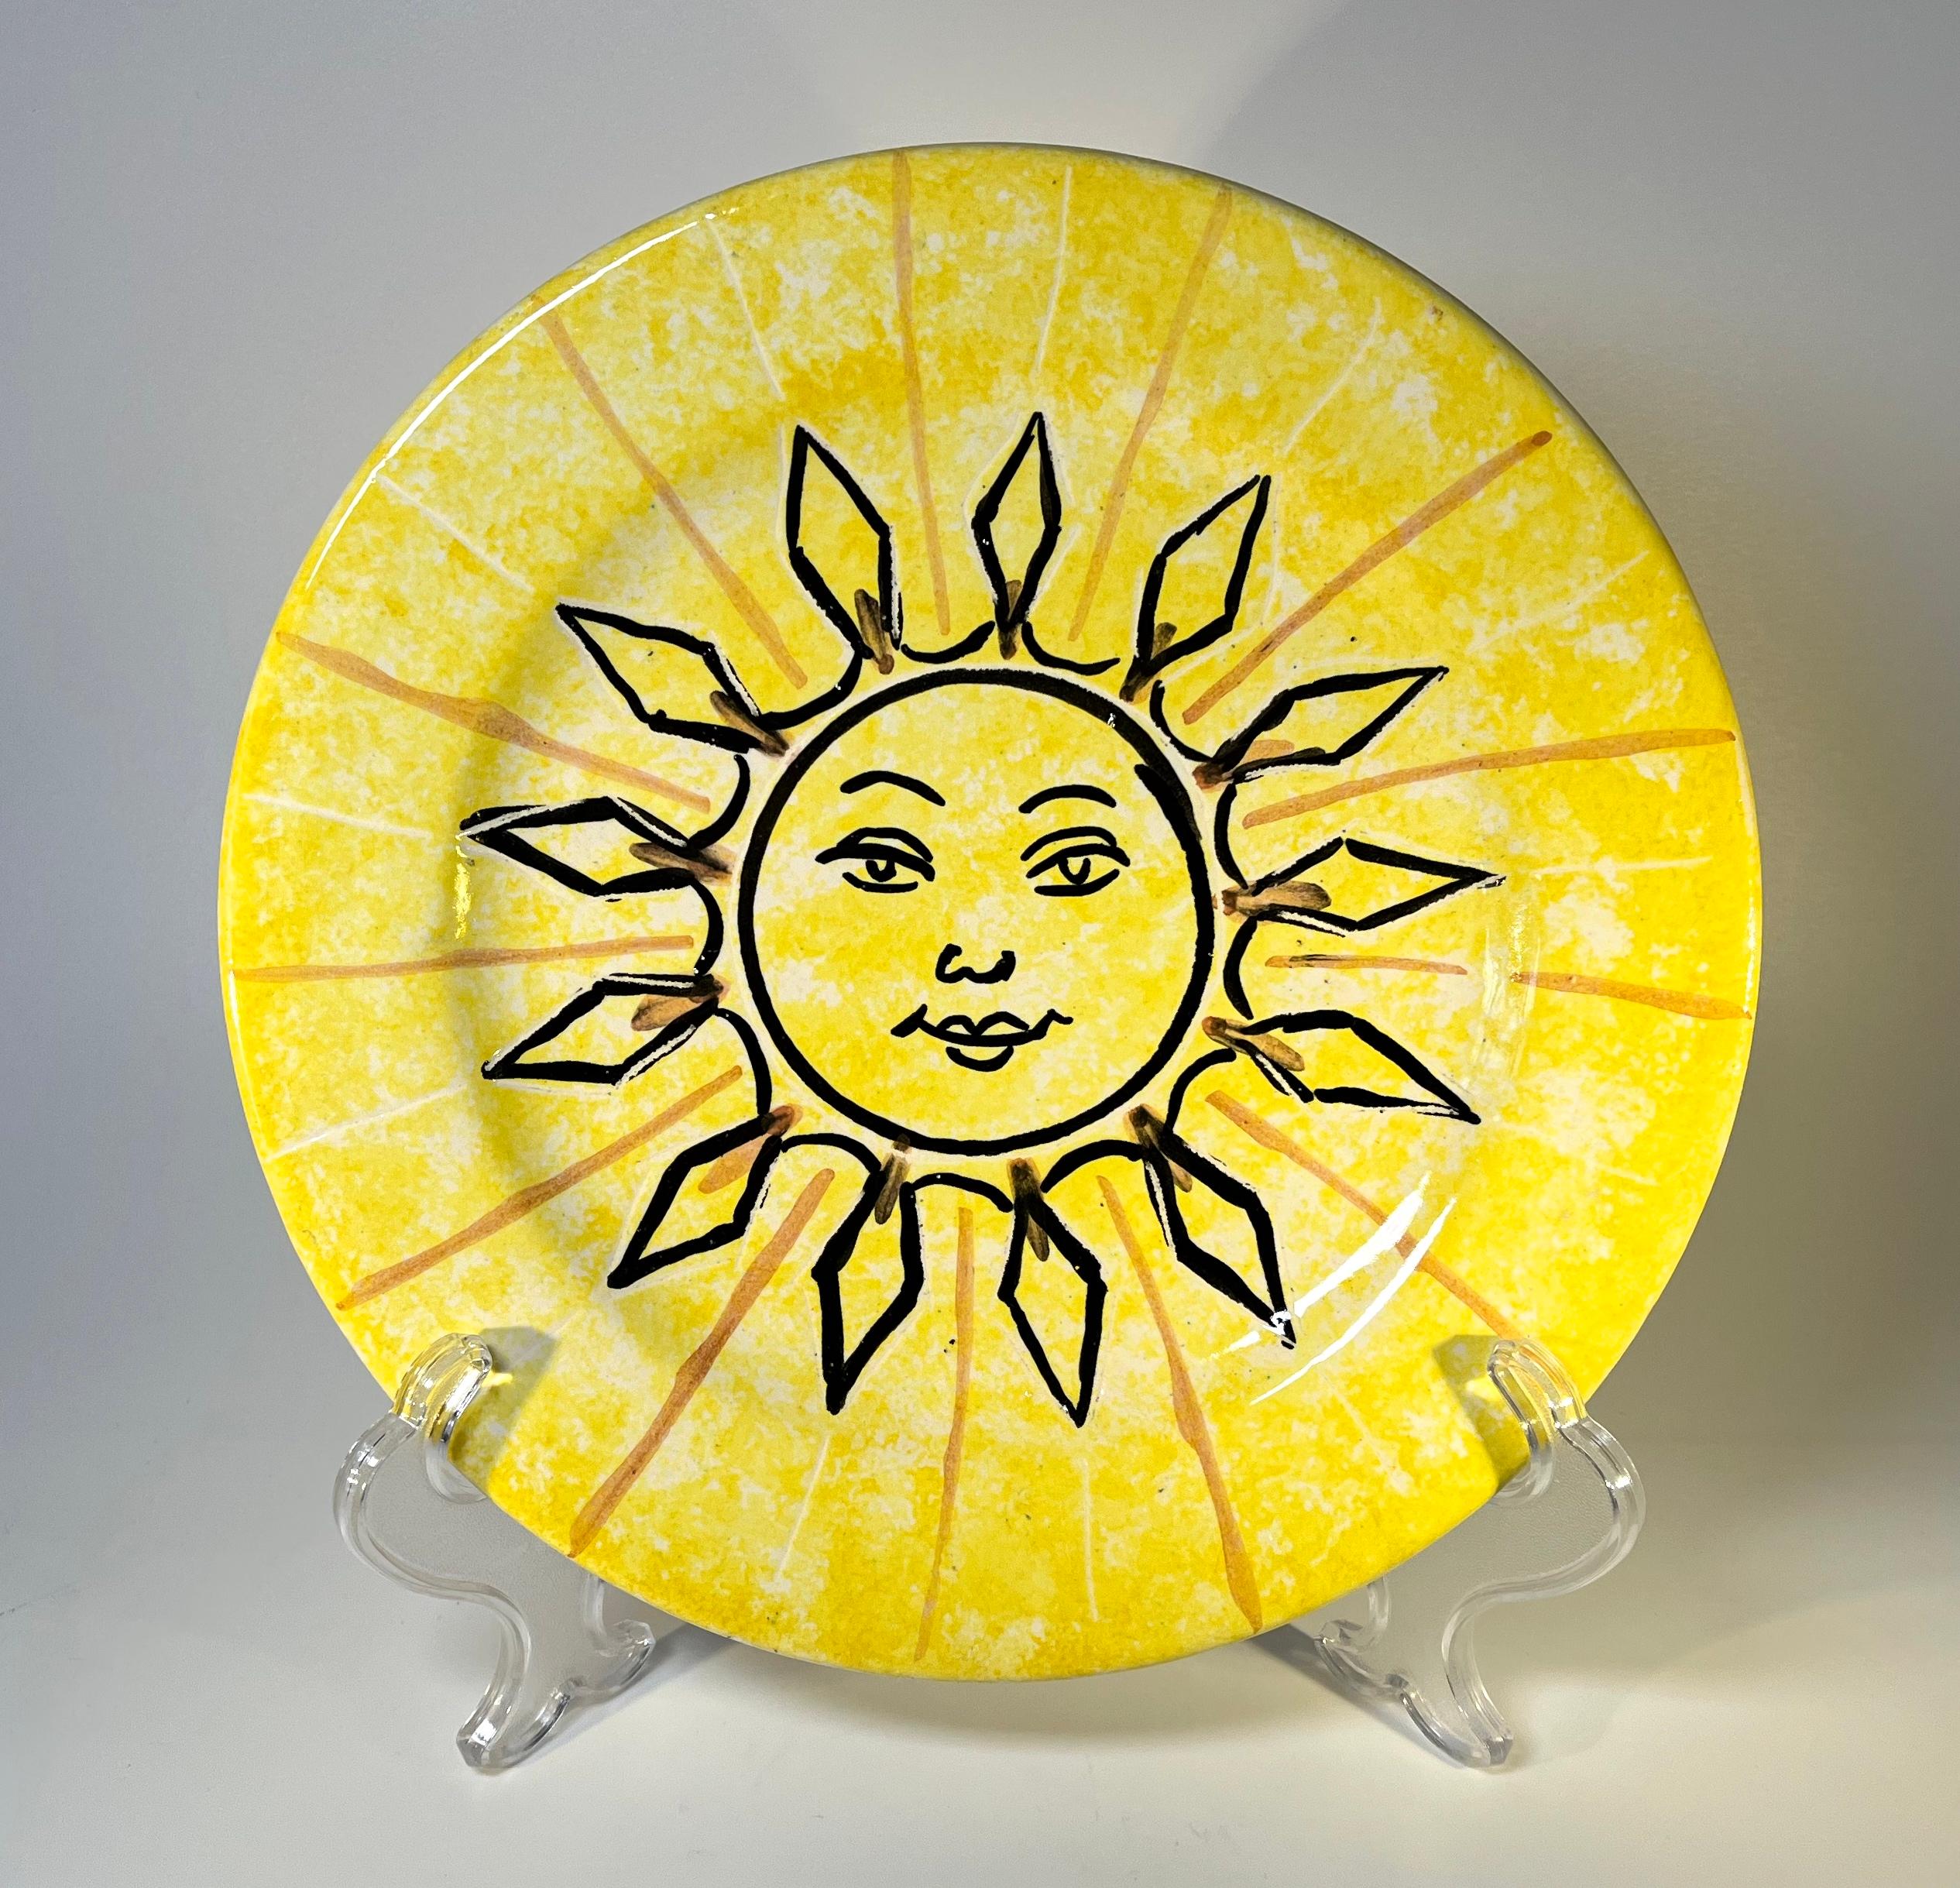 Soleil glazed ceramic hand painted decorative plate by Vallauris, France. Circa 1960's
Signed Vallauris
Measures: Height 5.5 inch, diameter 9.5 inch
In very good condition. Minor under glaze paint splatter
Wear consistent with age and use.